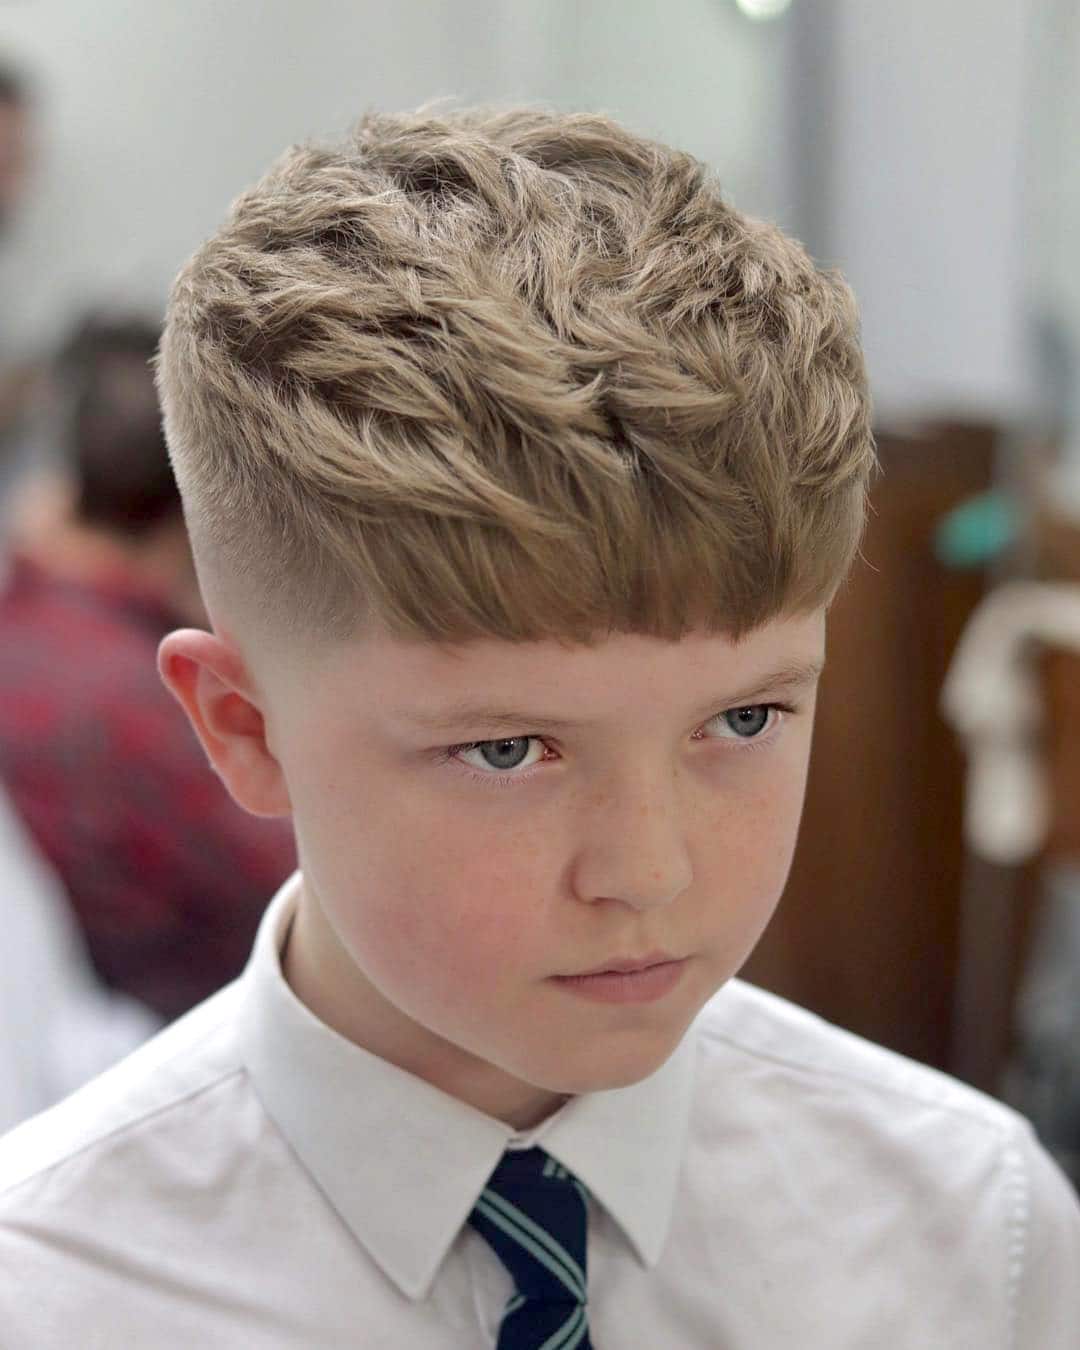 22 Cool Haircuts For Boys: 2021 Trends